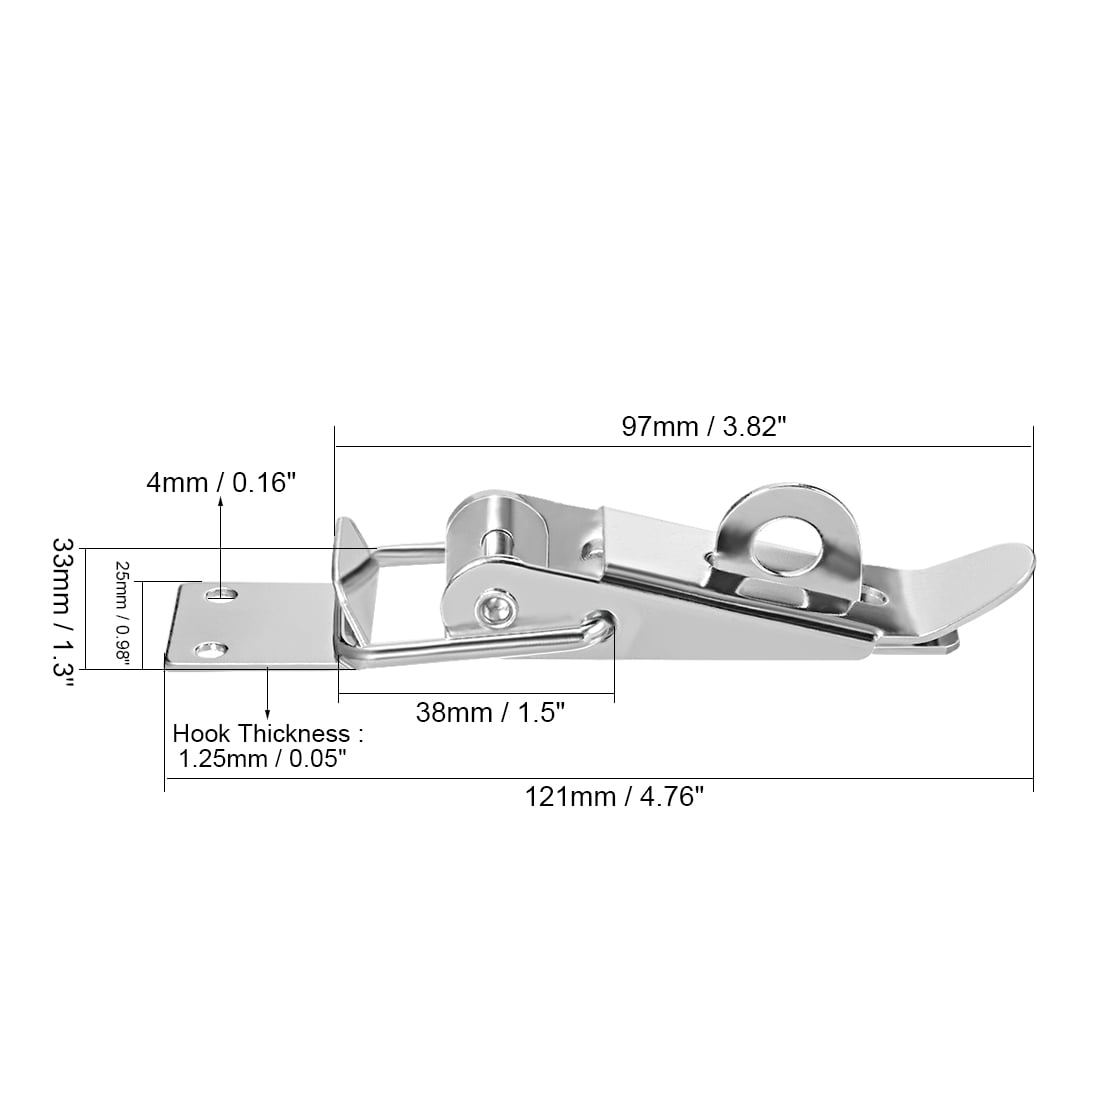 spring-loaded lever closures pack of 4 121 mm long iron bolt clamps for box case boot captures